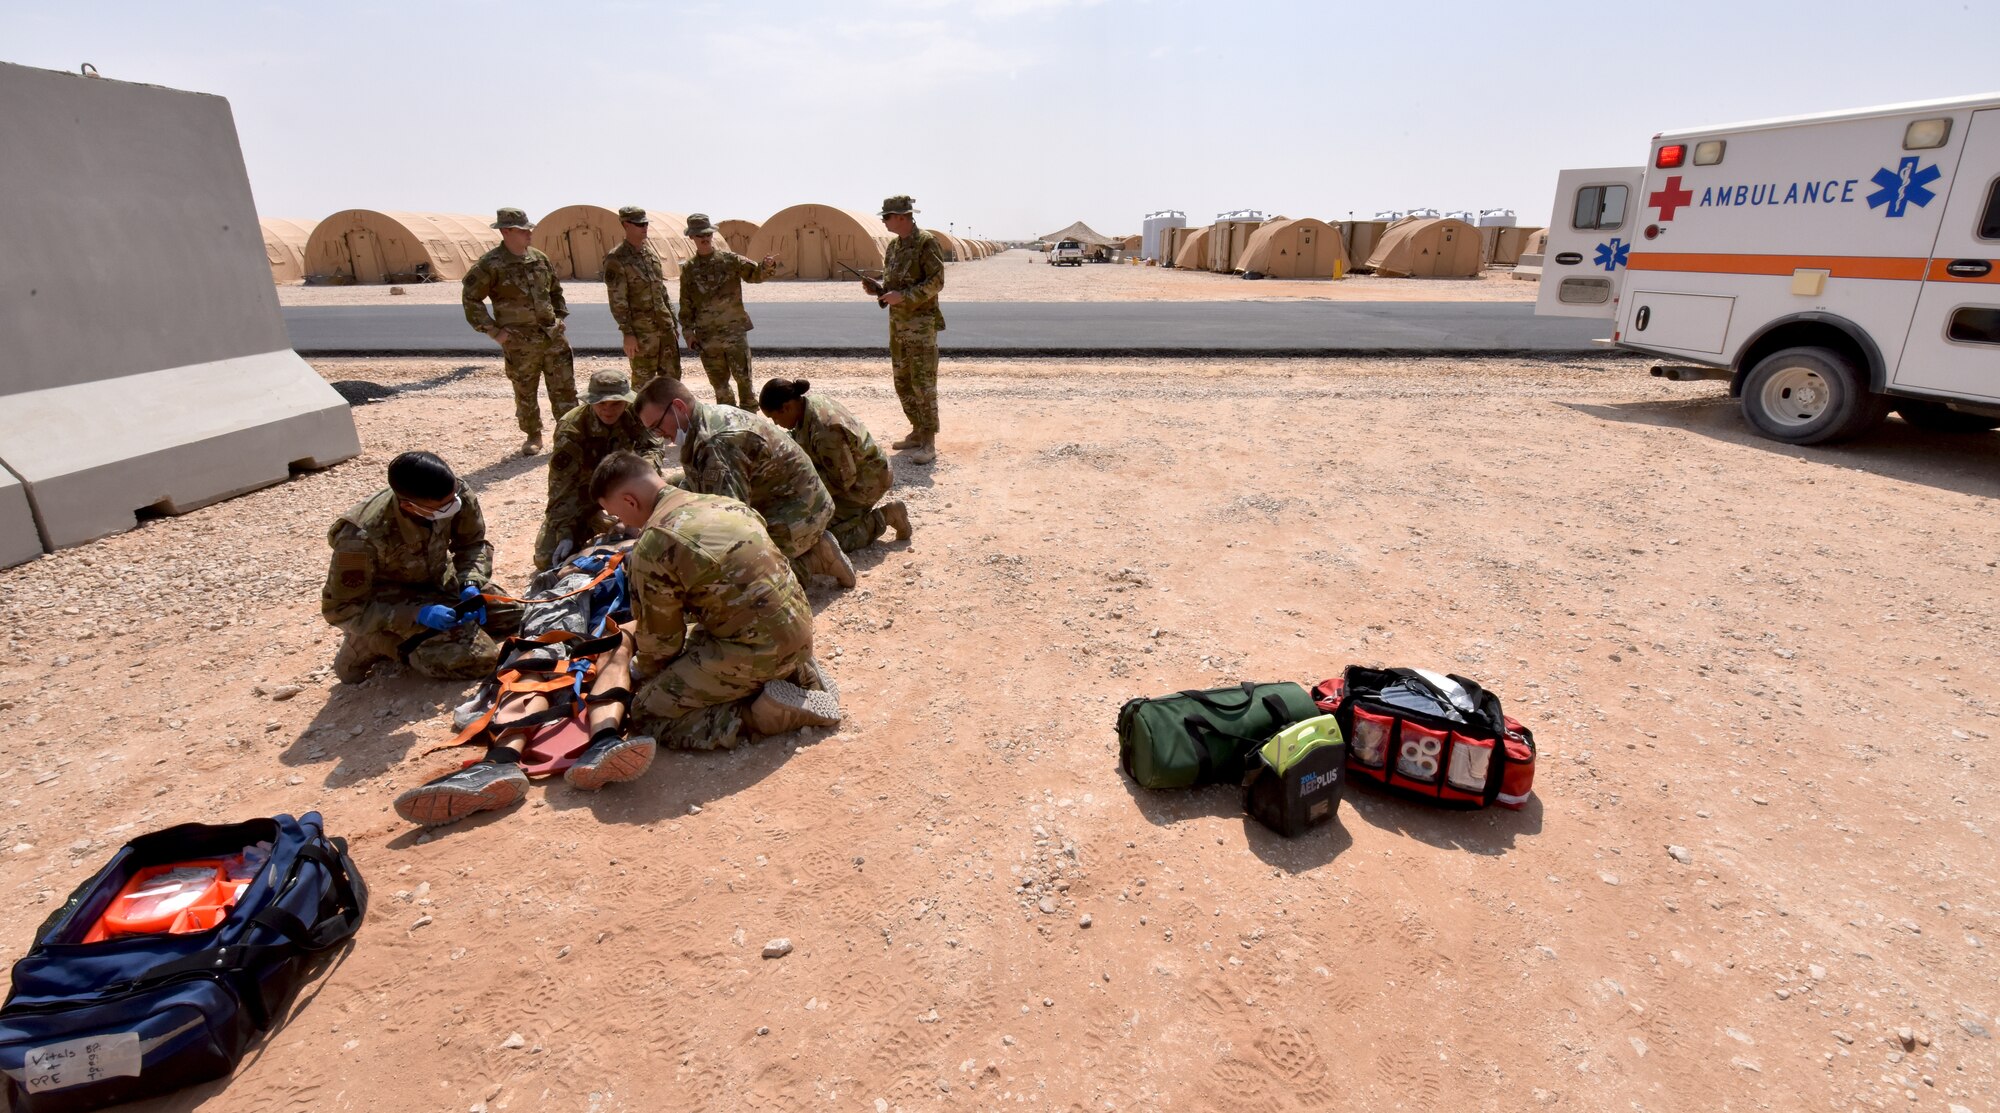 The 378th Expeditionary Medical Squadron conducted a trauma response exercise to practice its response, mitigation, treatment and evacuation of critically injured patients at Prince Sultan Air Base, Kingdom of Saudi Arabia.